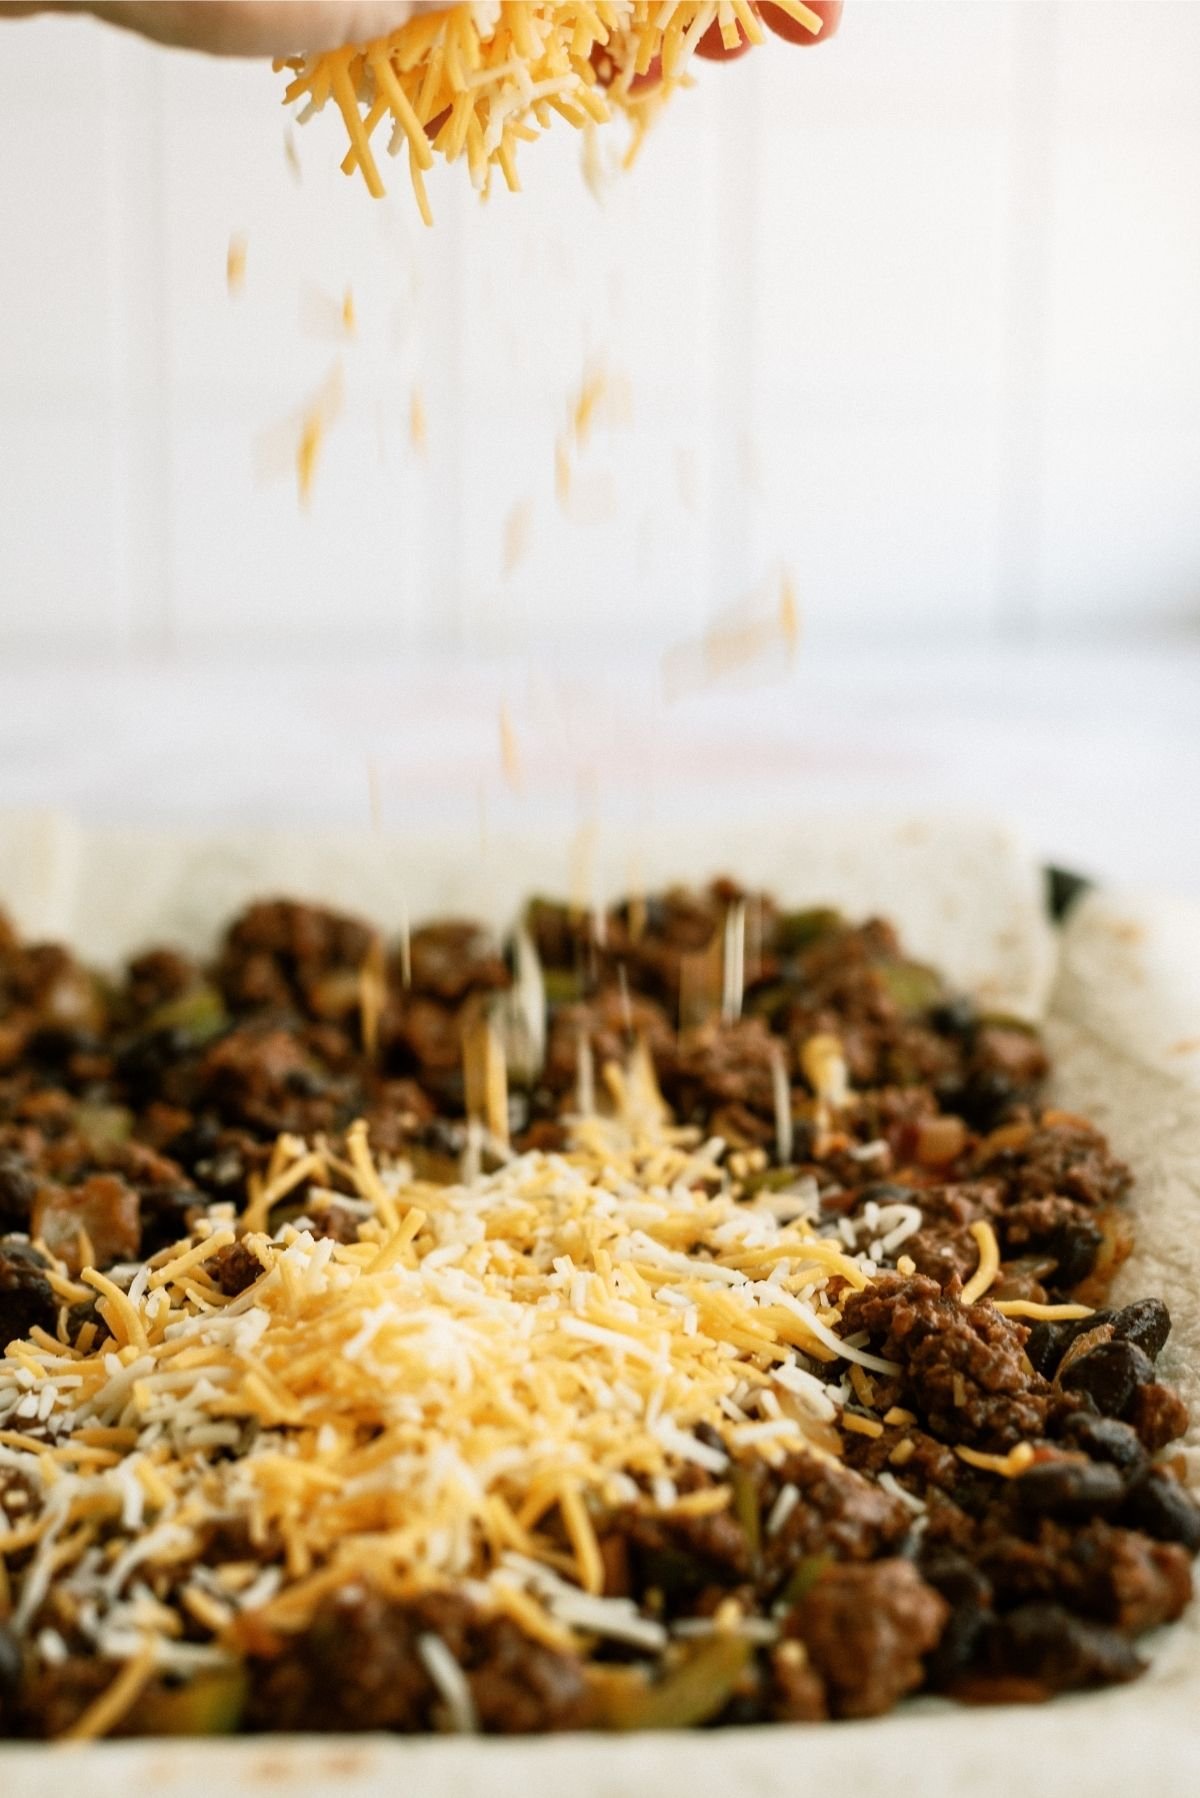 Shredded Cheese sprinkled over Meat mixture on top of tortillas for Sheet Pan Ground Beef Quesadillas Recipe